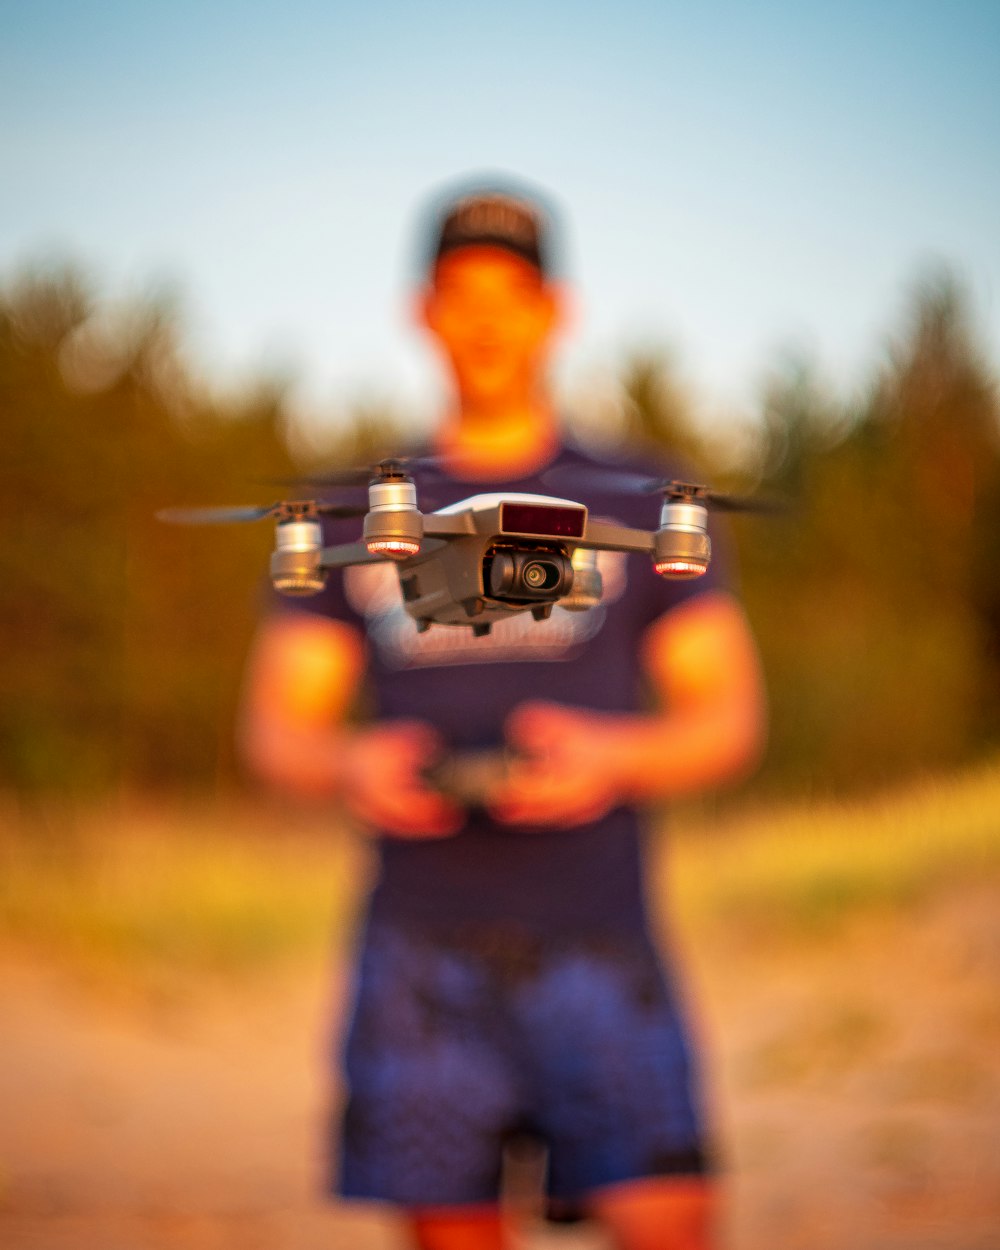 a man holding a remote controlled flying device